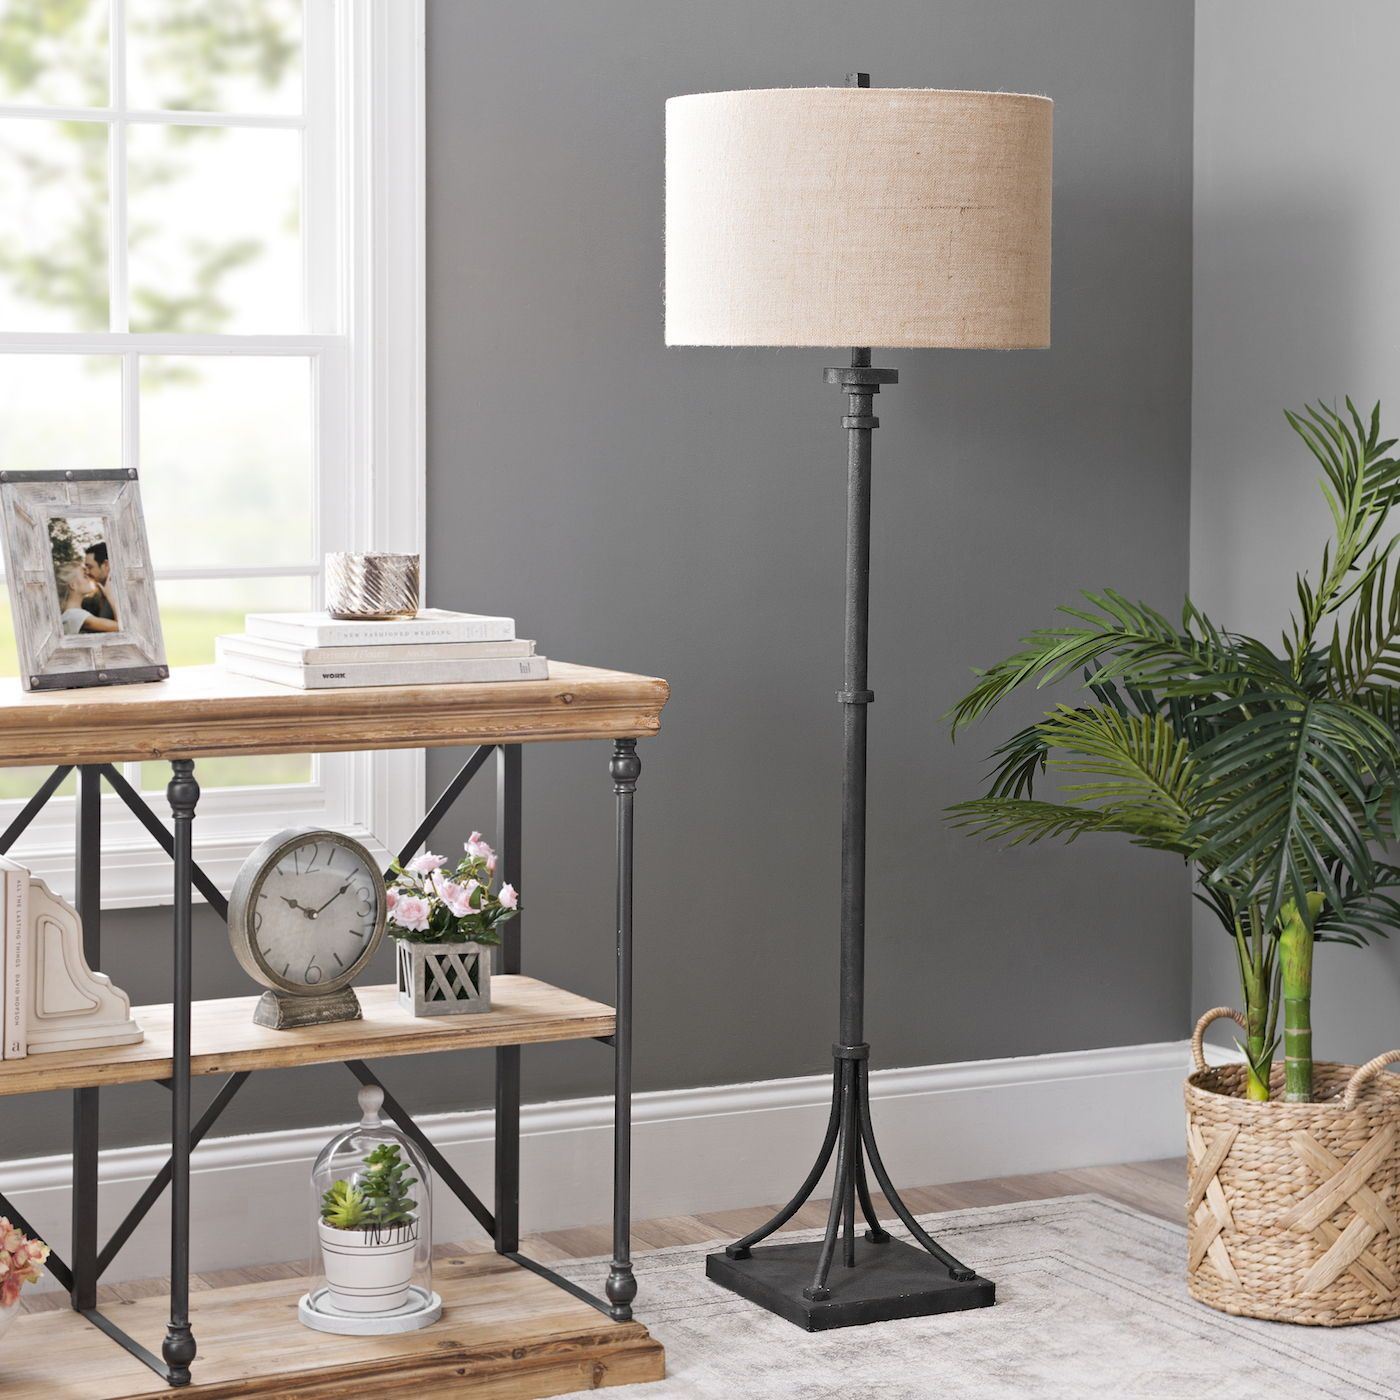 Product Details Sonoma Iron Floor Lamp In 2019 Decorative pertaining to measurements 1400 X 1400